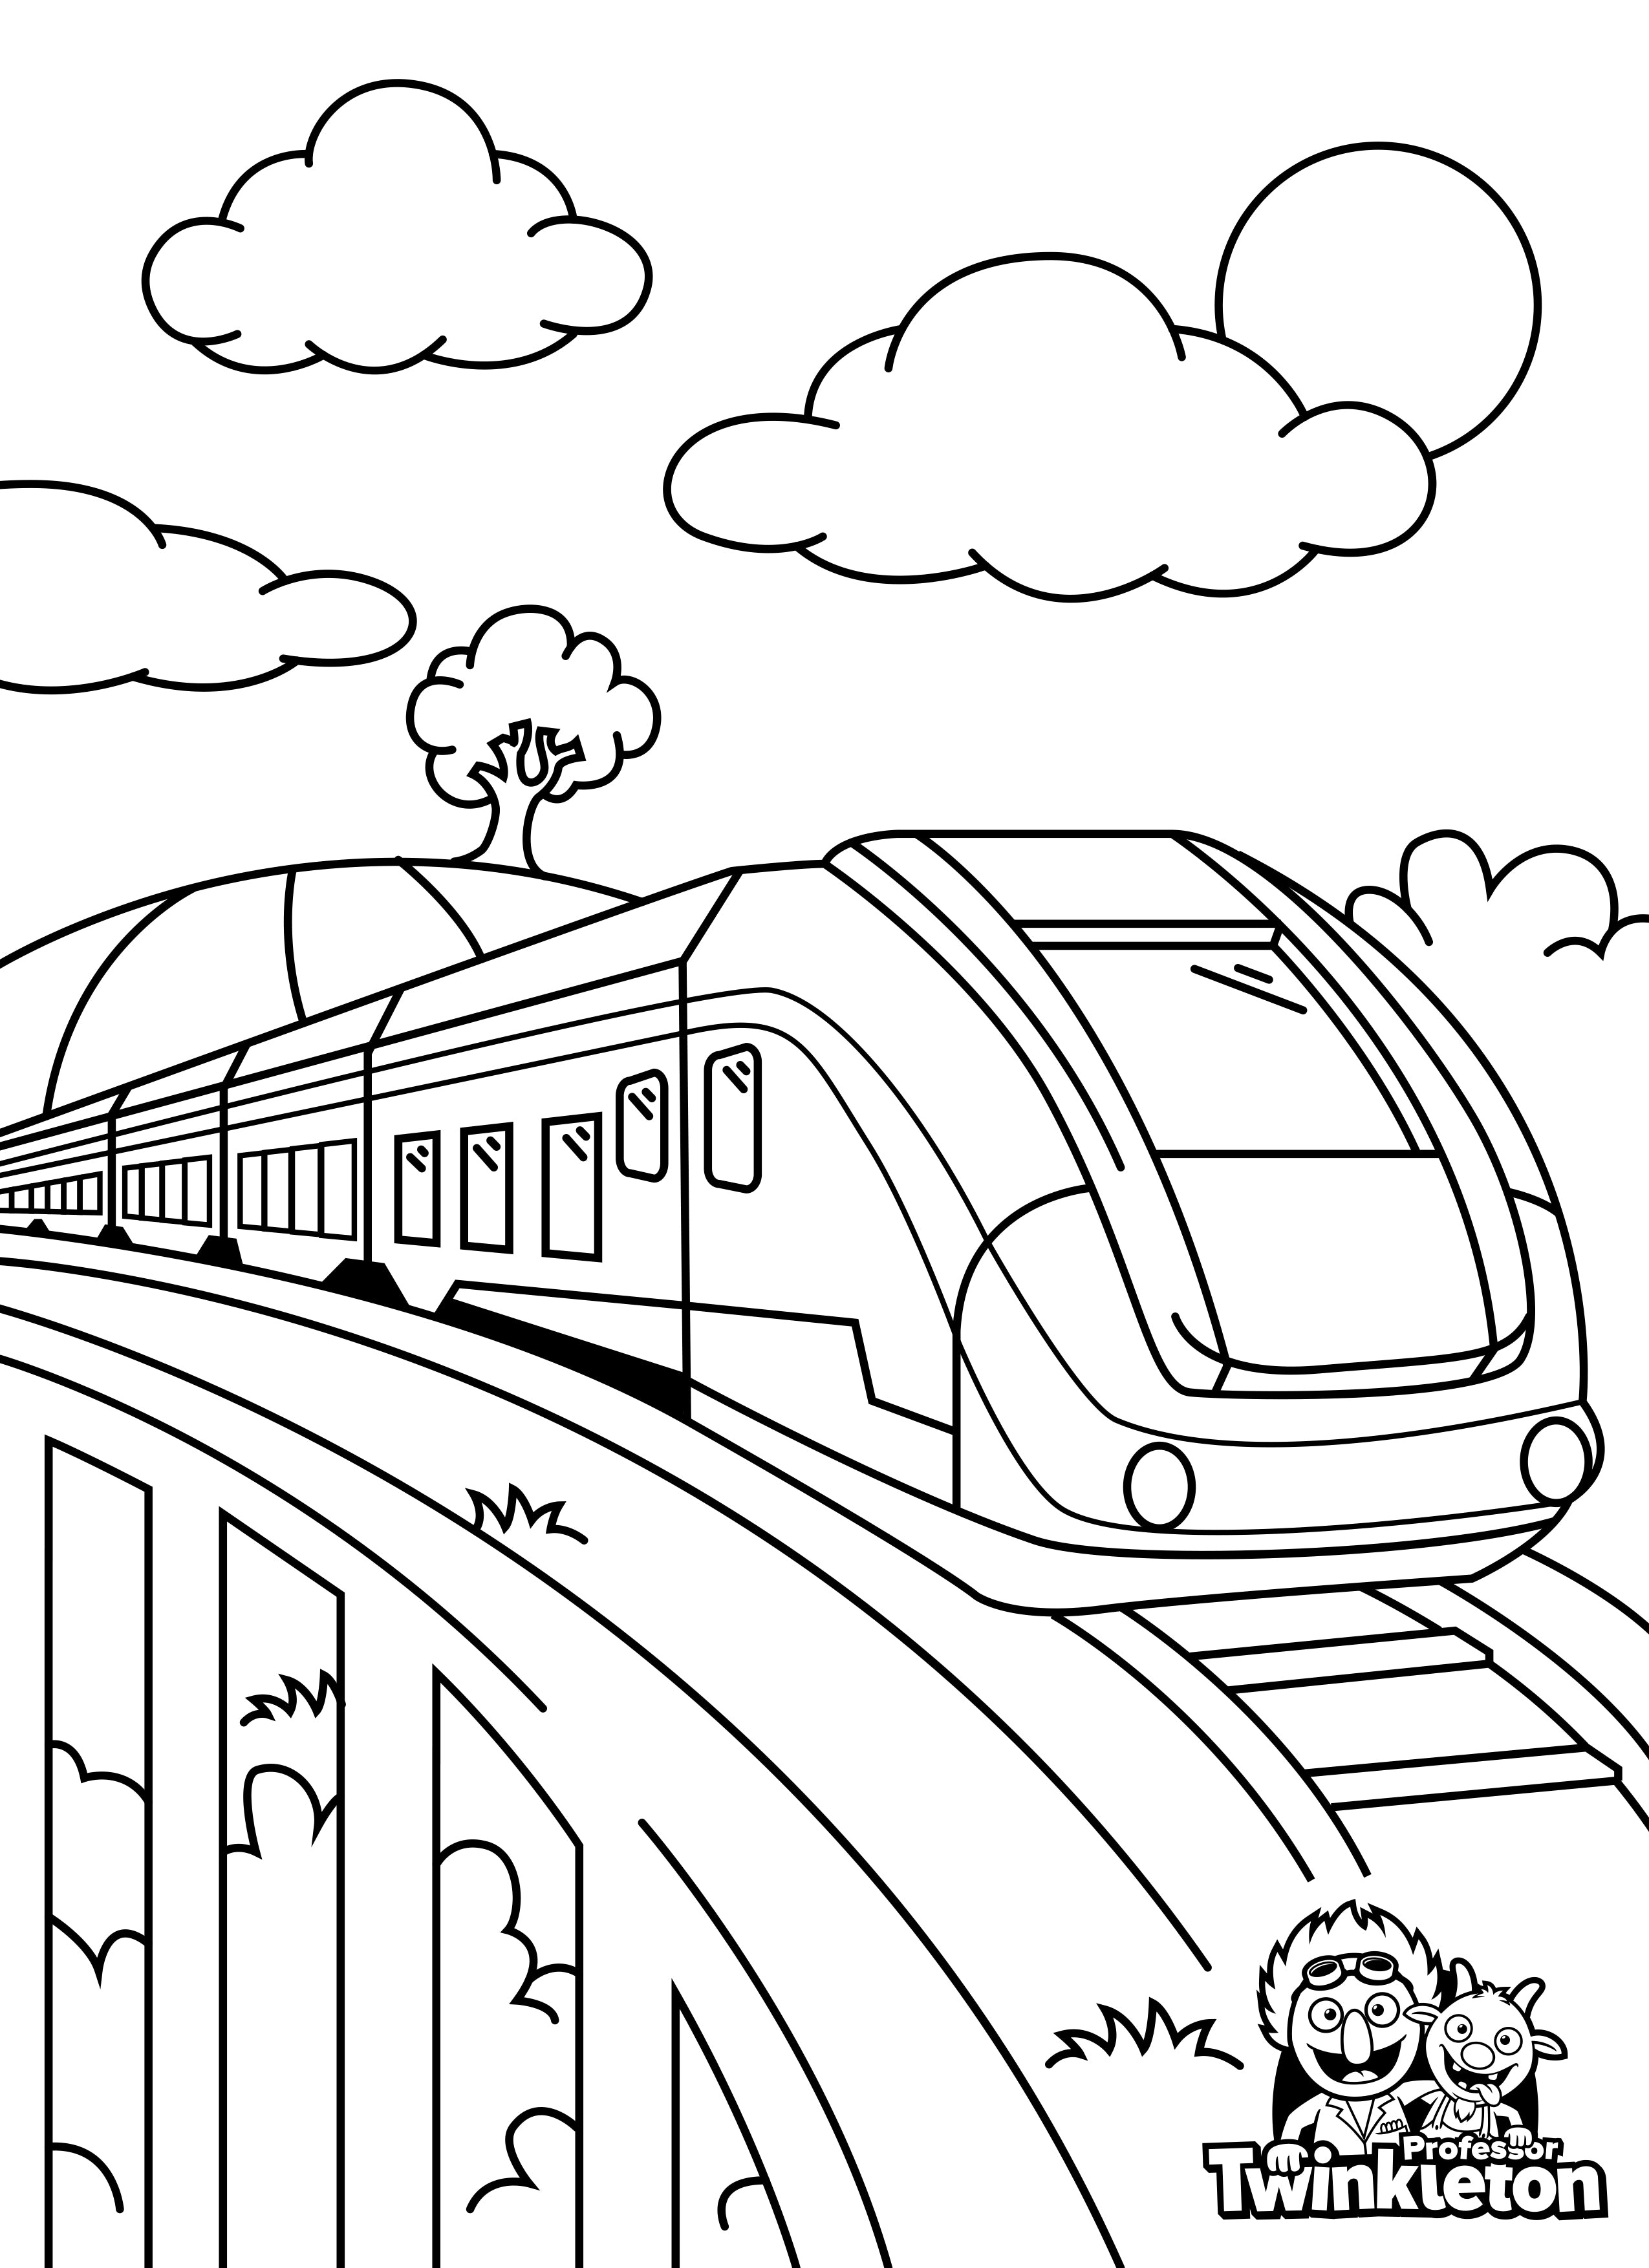 The Train Traveling Down A Railroad For Coloring Outline Sketch Drawing  Vector PNG Image Free Download And Clipart Image For Free Download -  Lovepik | 380529651